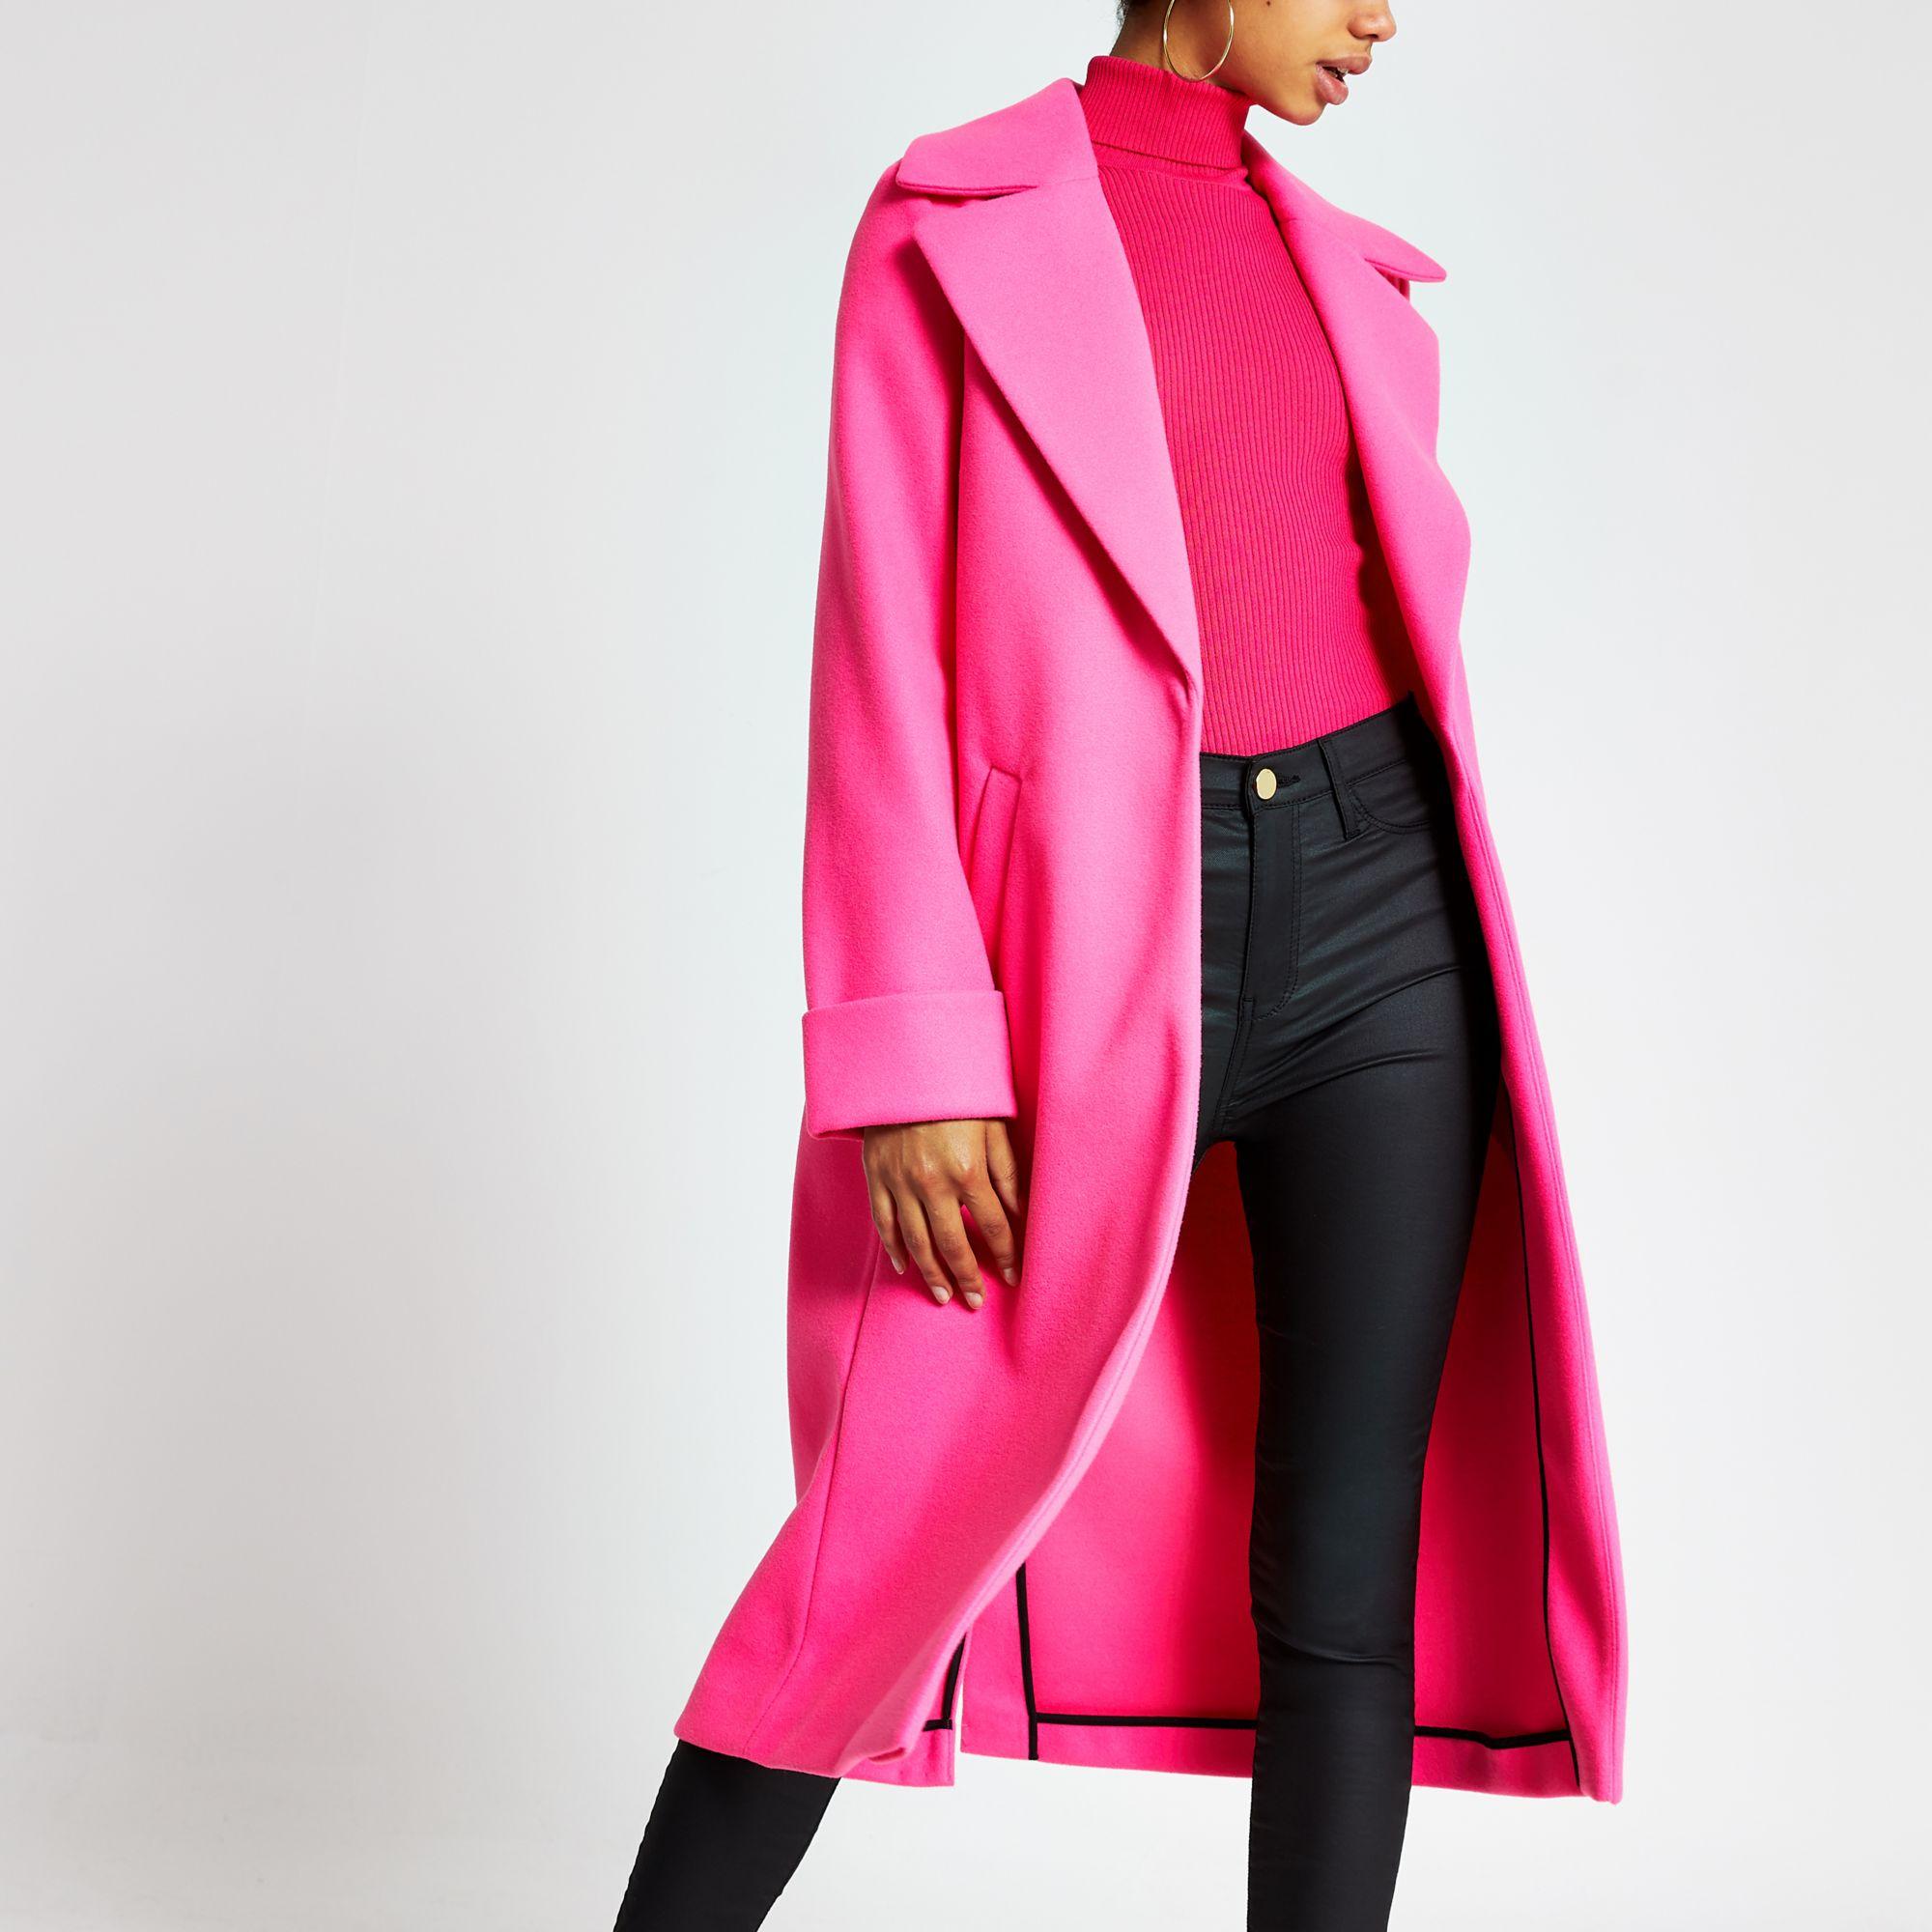 River Island Bright Pink Single Breasted Longline Coat | Lyst